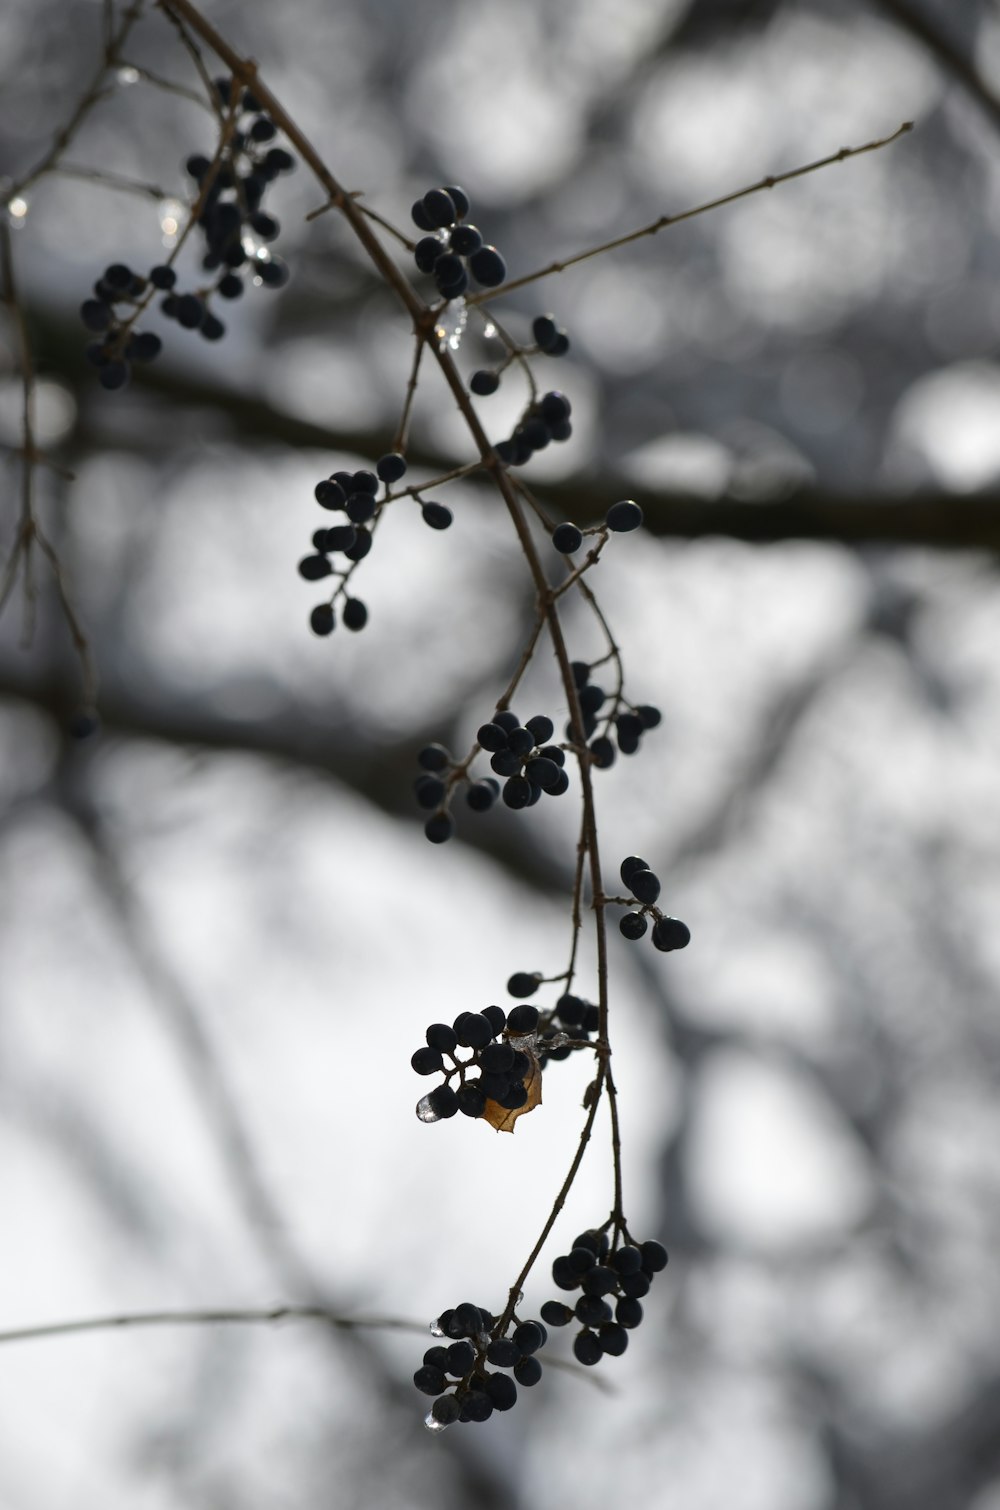 a branch with small black berries hanging from it